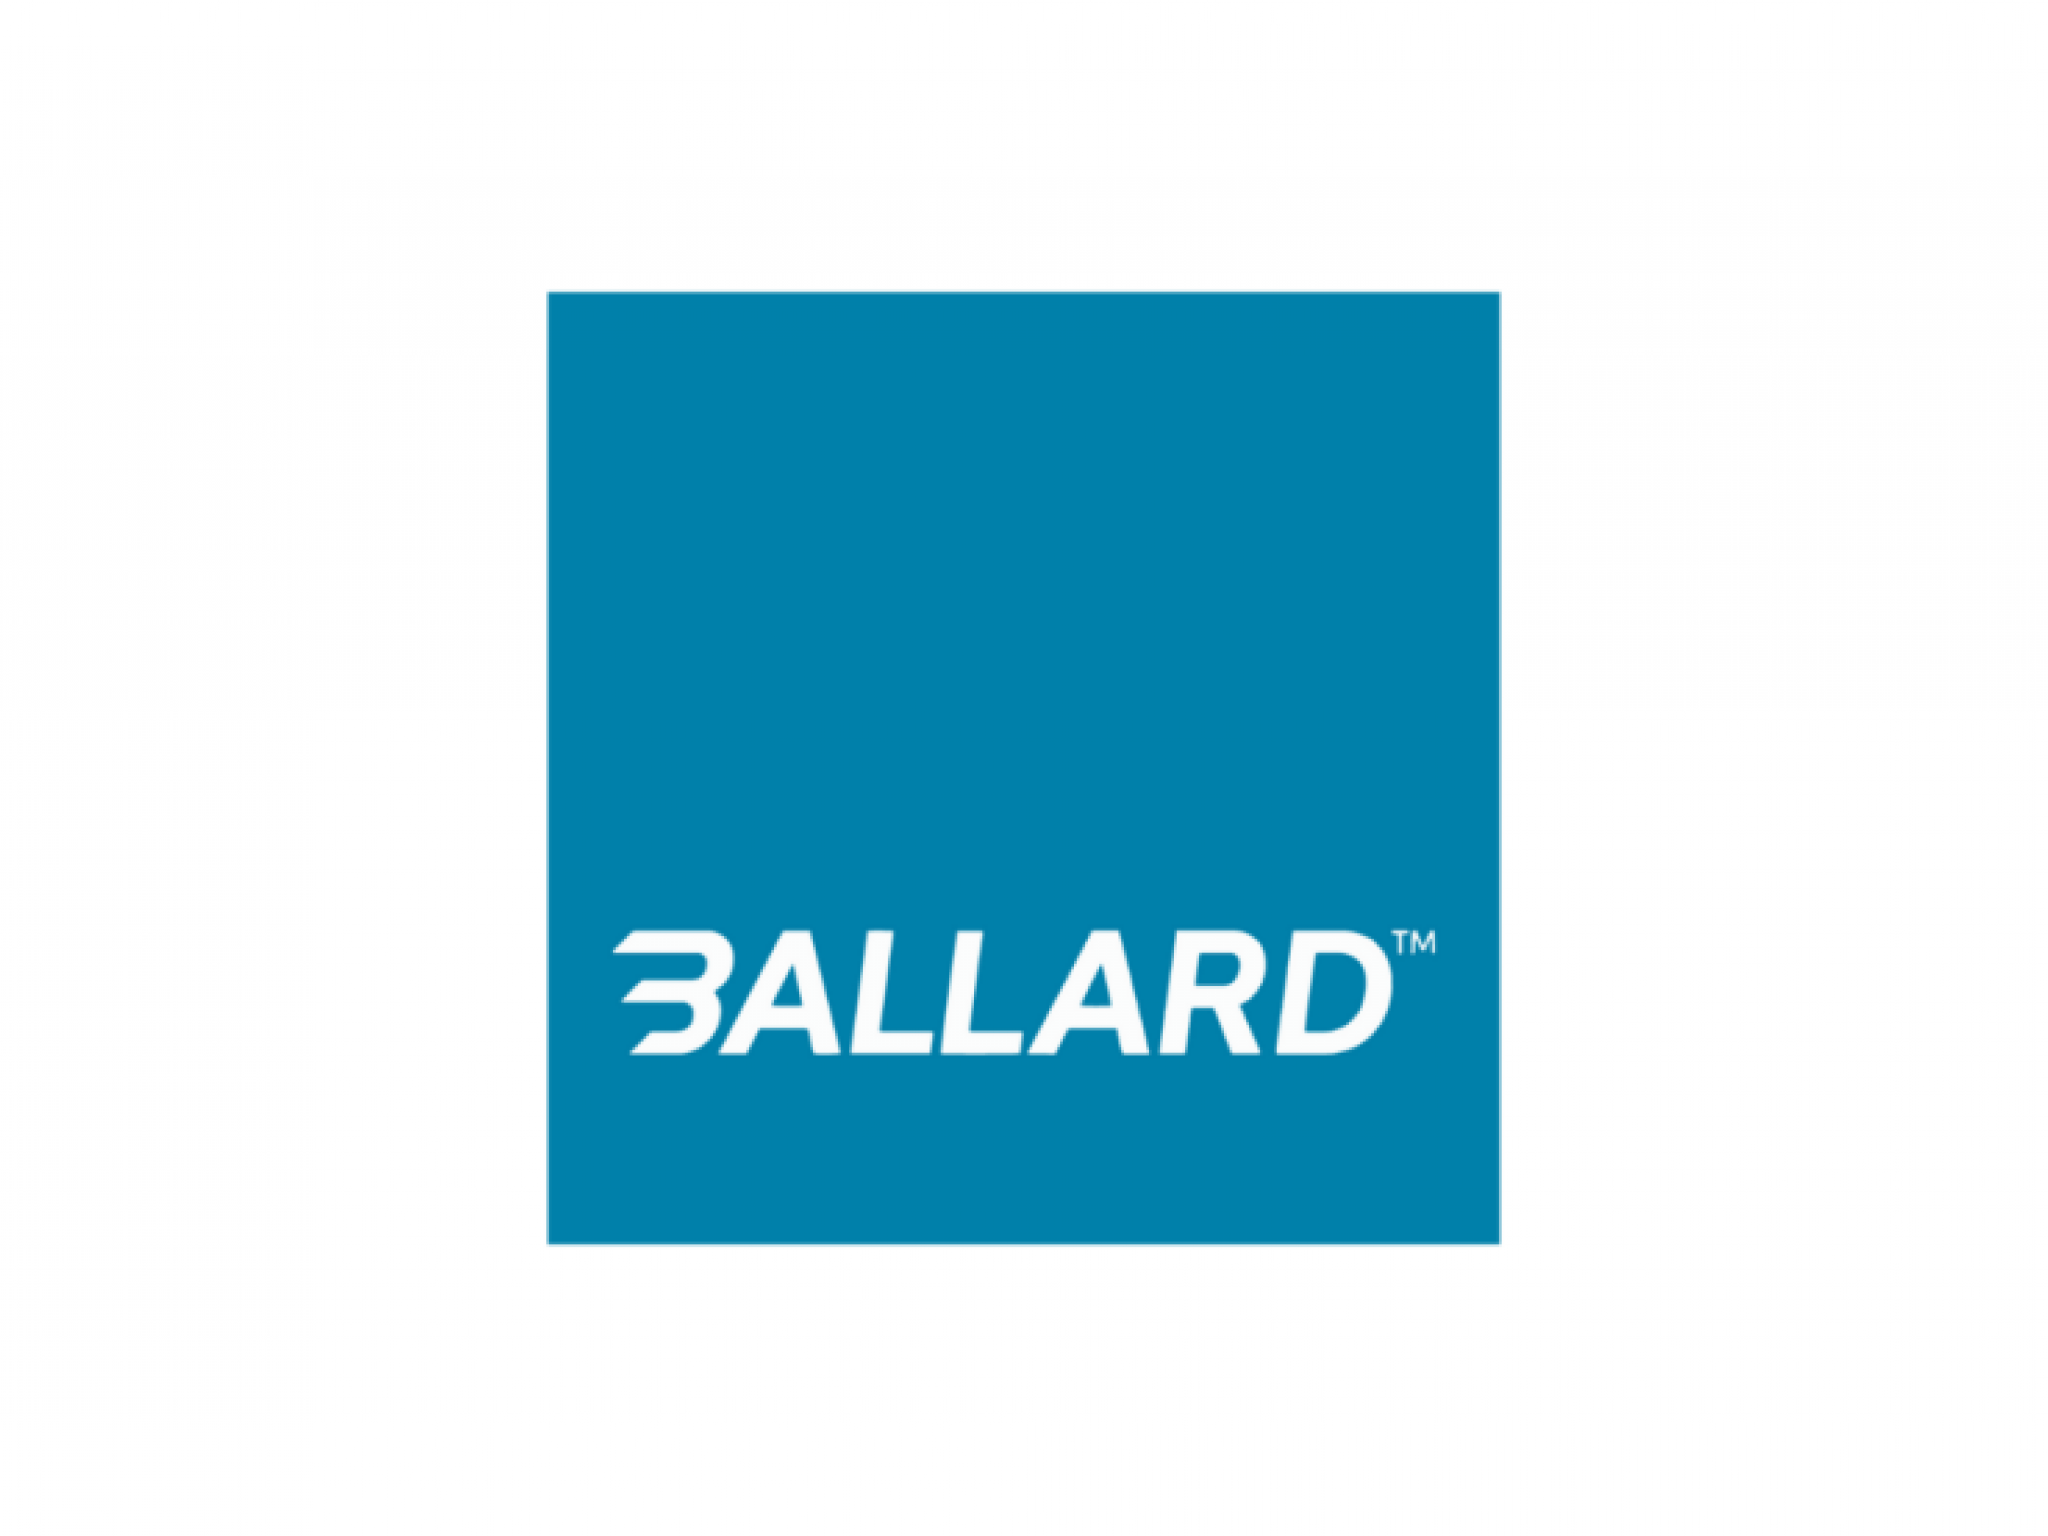  whats-going-on-with-ballard-power-systems-stock-tuesday 